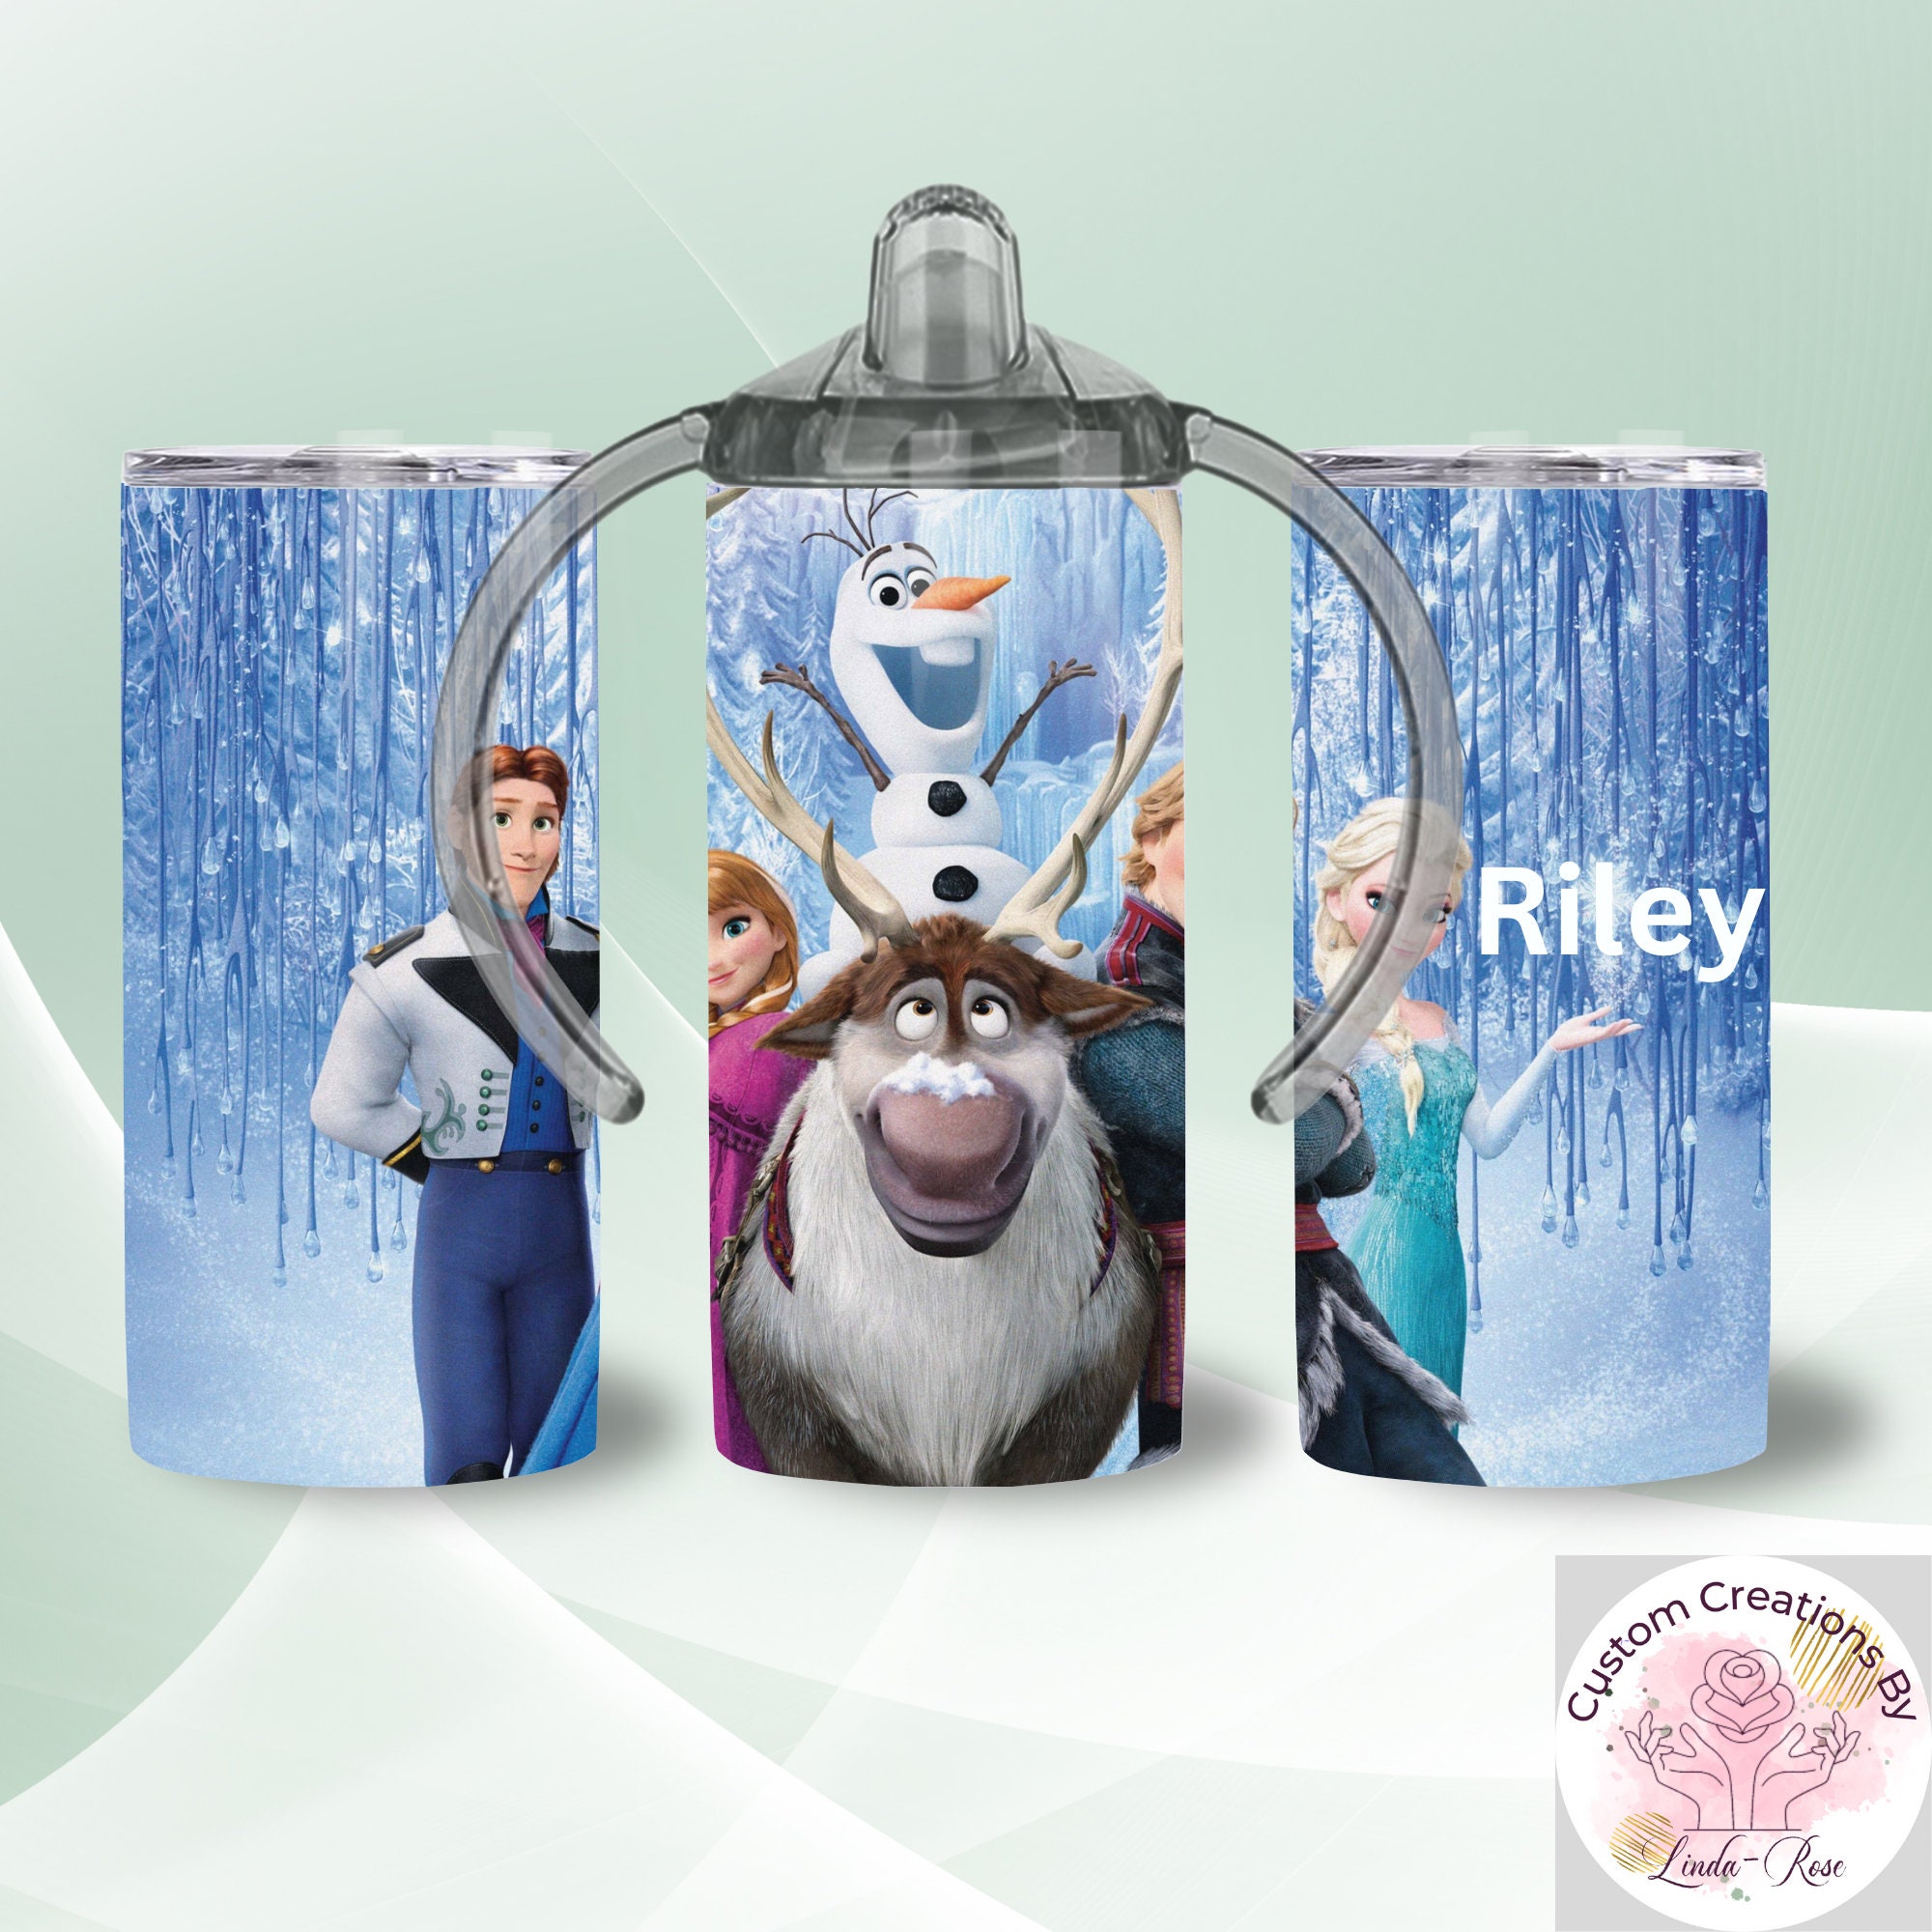 Elsa Frozen Water Bottle Insulated 12oz & 20oz Sippy Cups